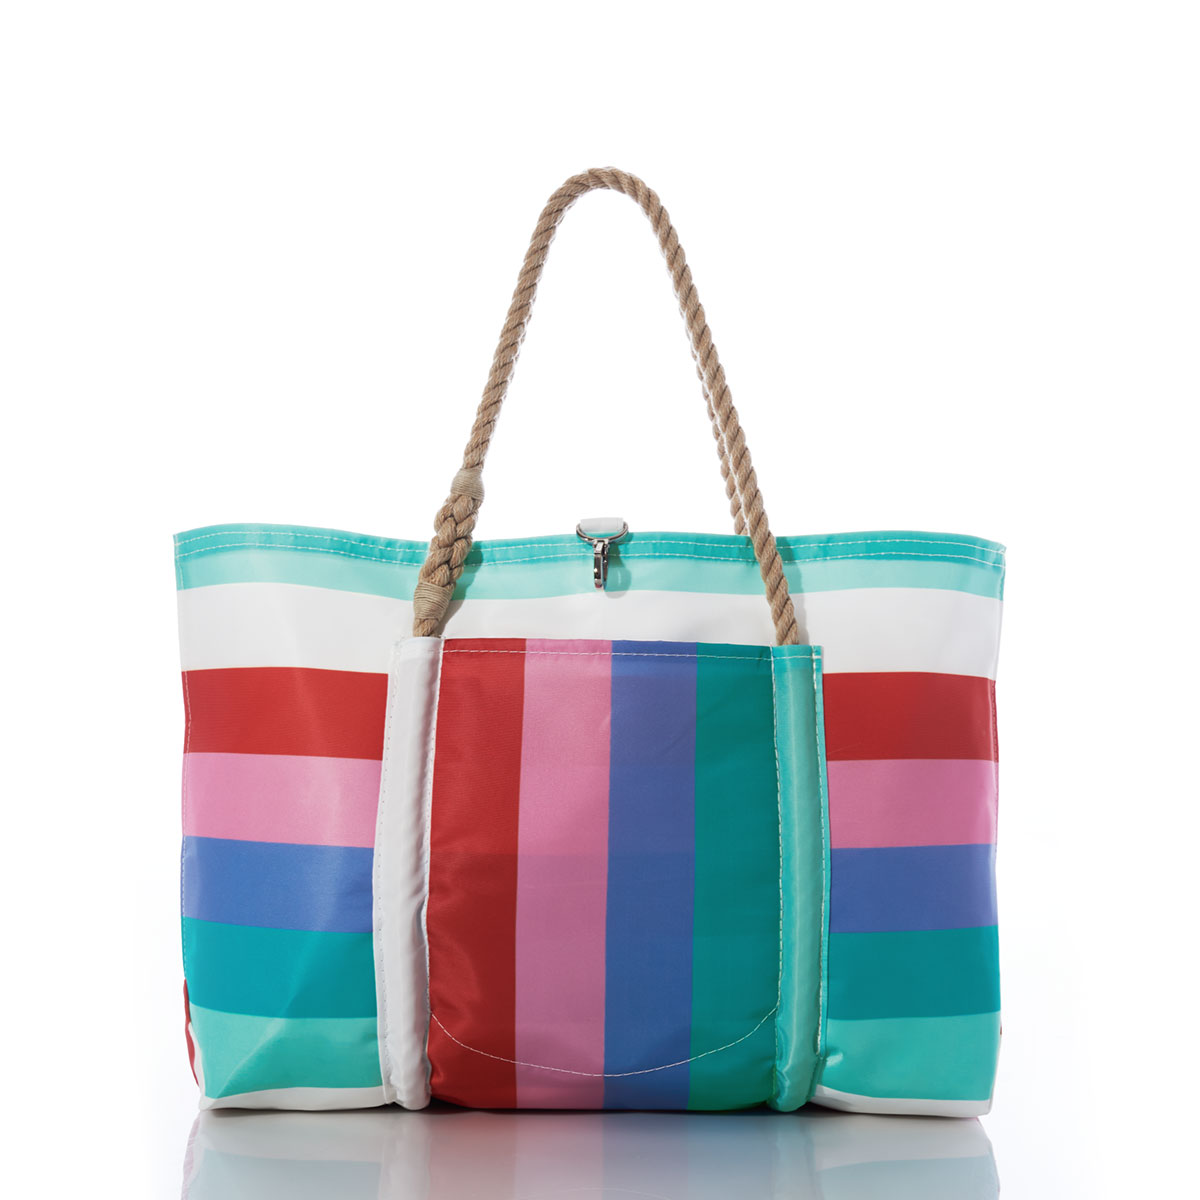 a recycled sail cloth pier tote with hemp rope handles and clasp closure is printed with bold stripes in shades of pinks and teals